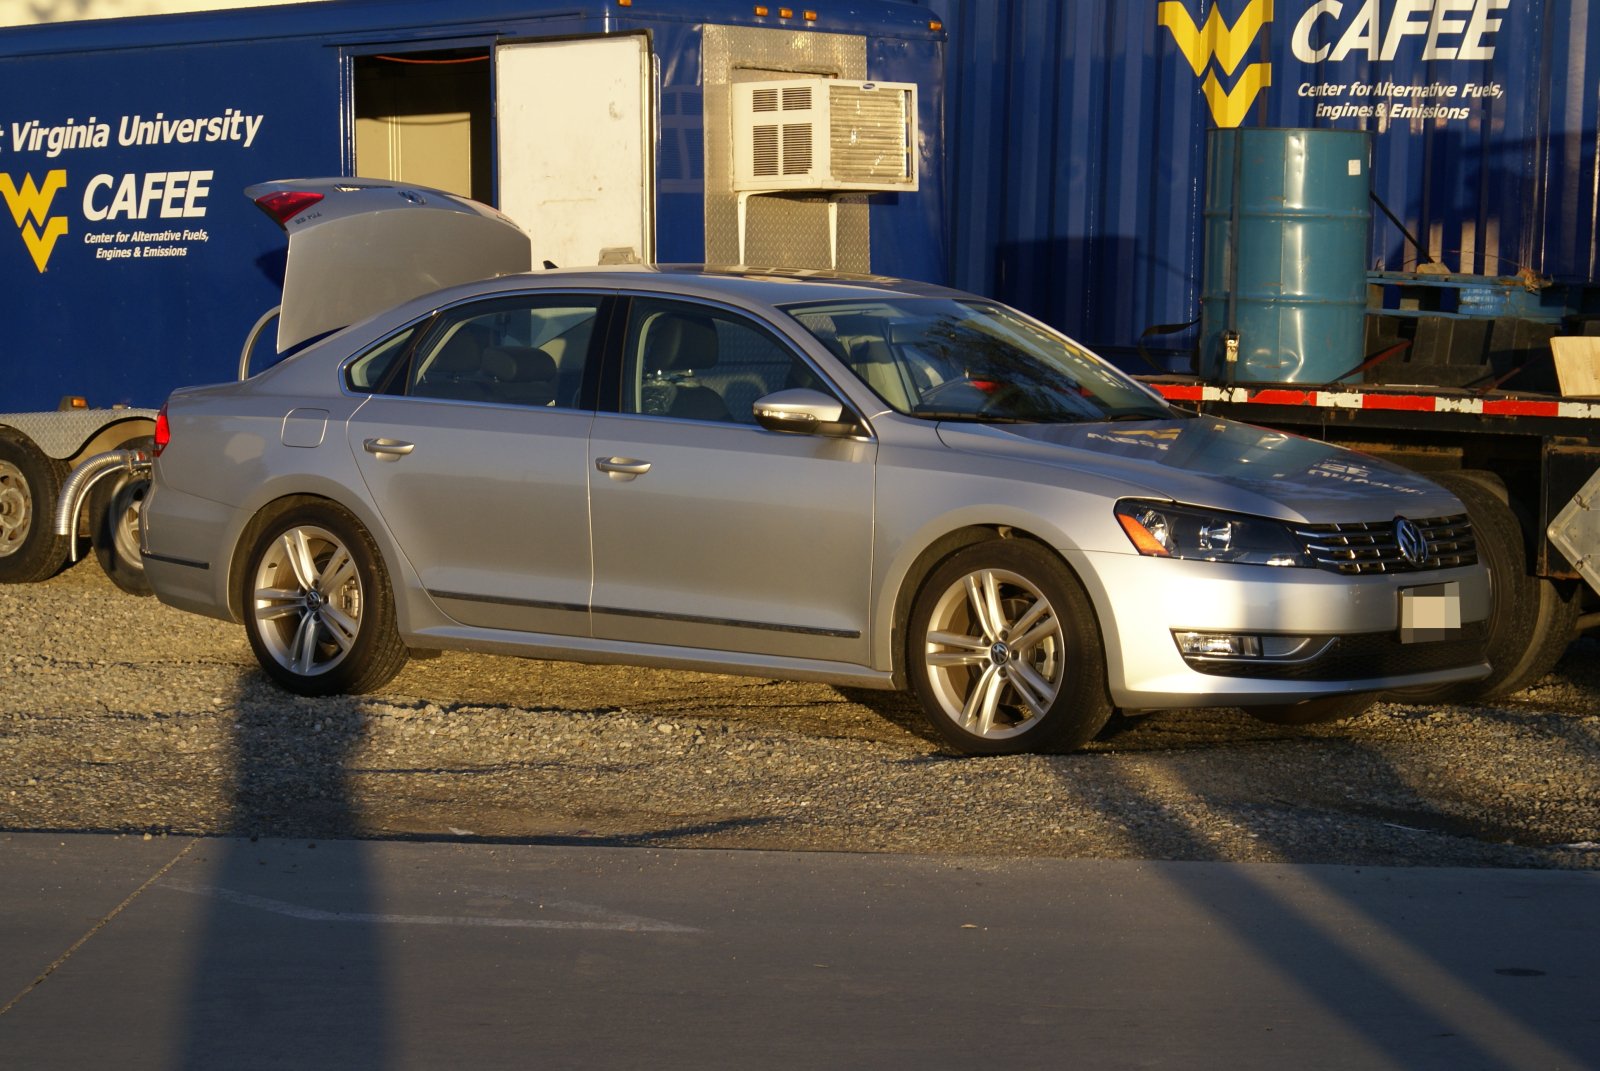 Volkswagen Passat tested by Center for Alternative Fuels, Engines and Emissions at West Virginia University. Photo by Marc Besch